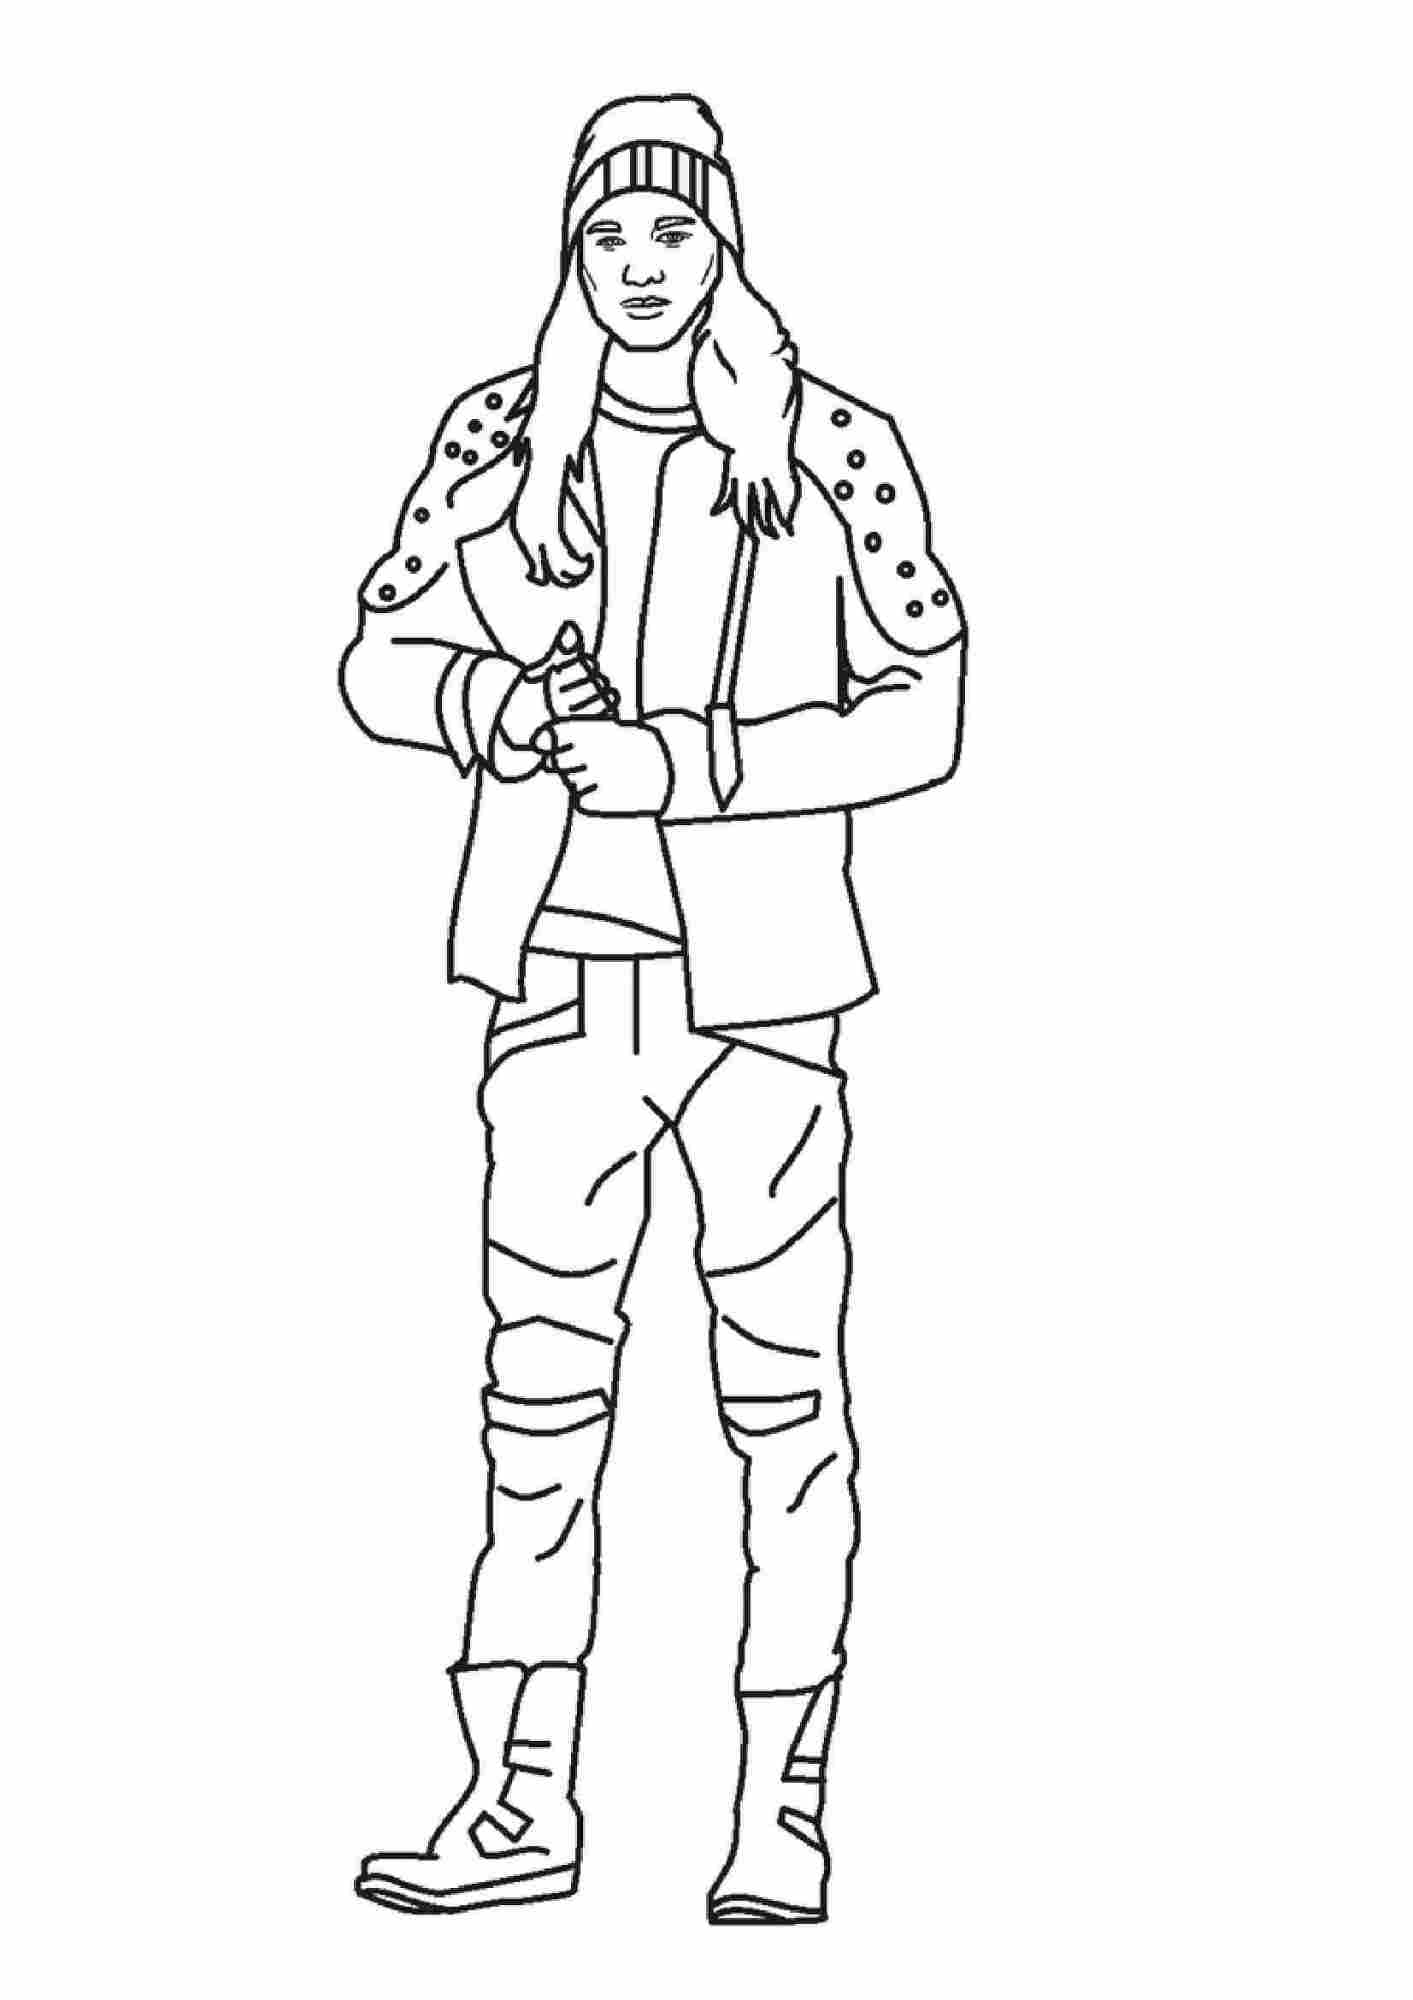 Jay from Descendants 2, quick-witted boy with charm to spare Coloring Pages